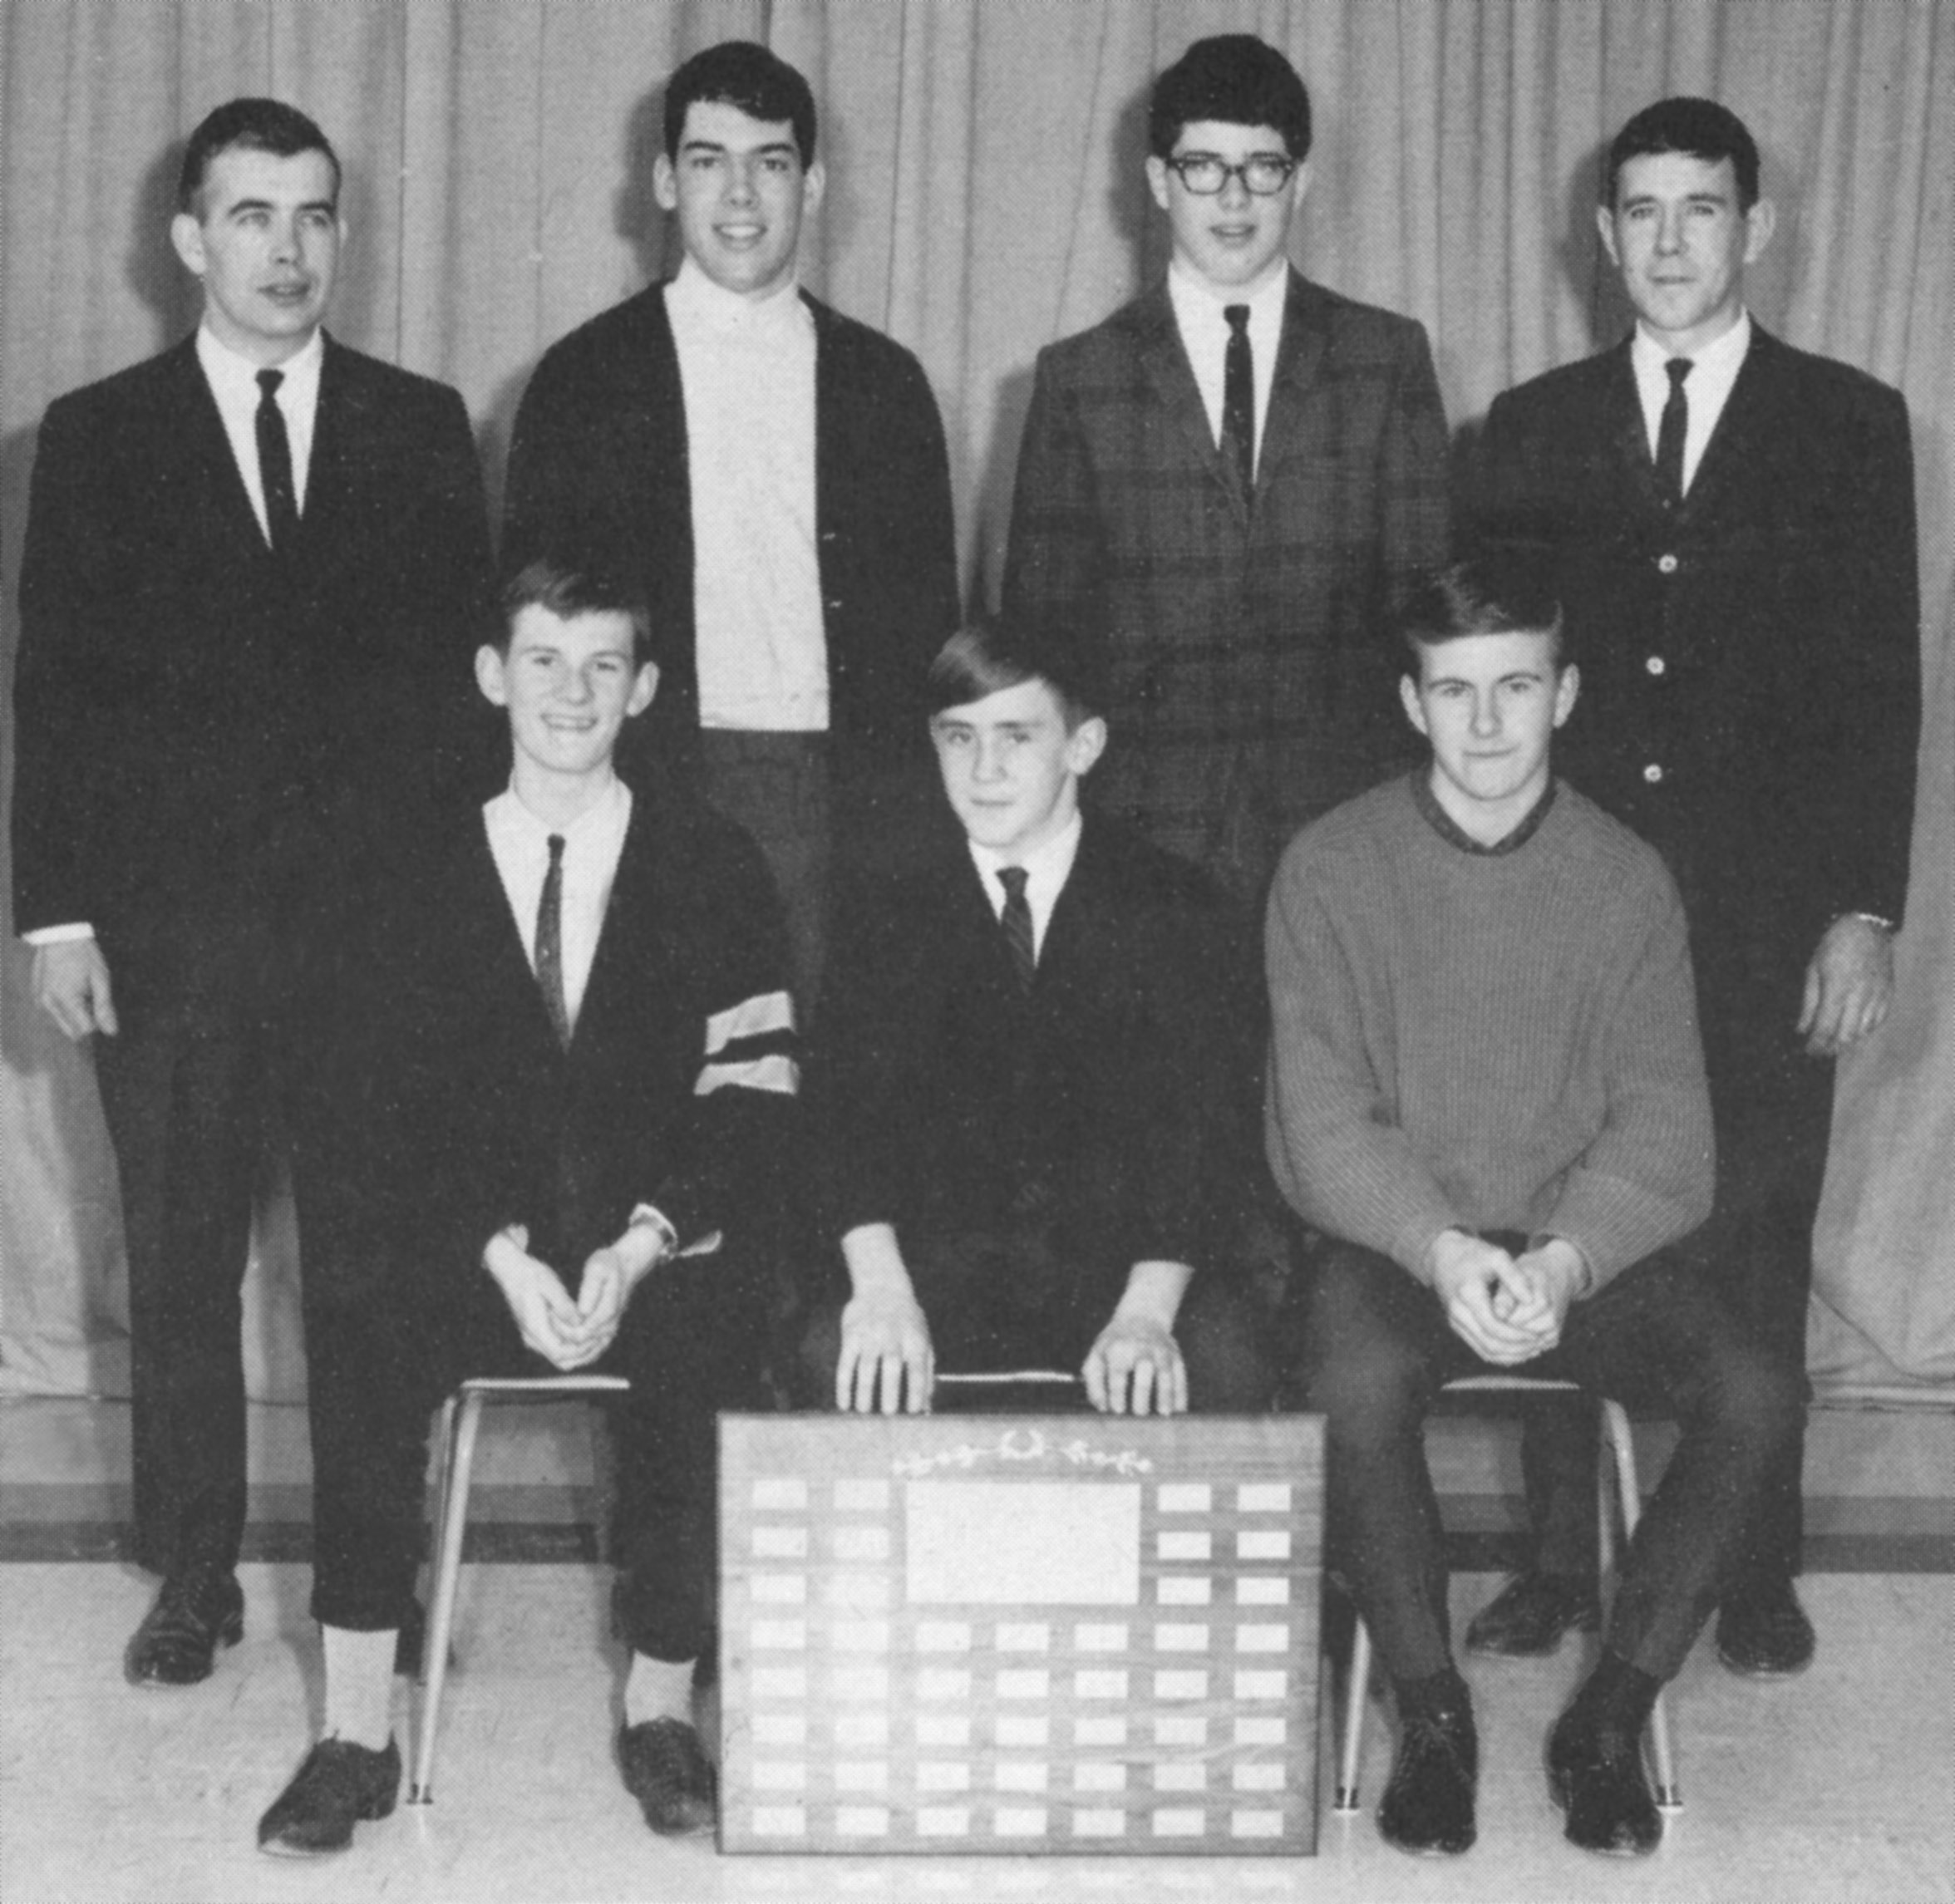 (Click to magnify) FRONT ROW: Ted Ballinger, D. Gibbons, A. Berry; ***BACK ROW: Mr. J. Addison, Brian St.John, J. Manley, Mr. Grant.